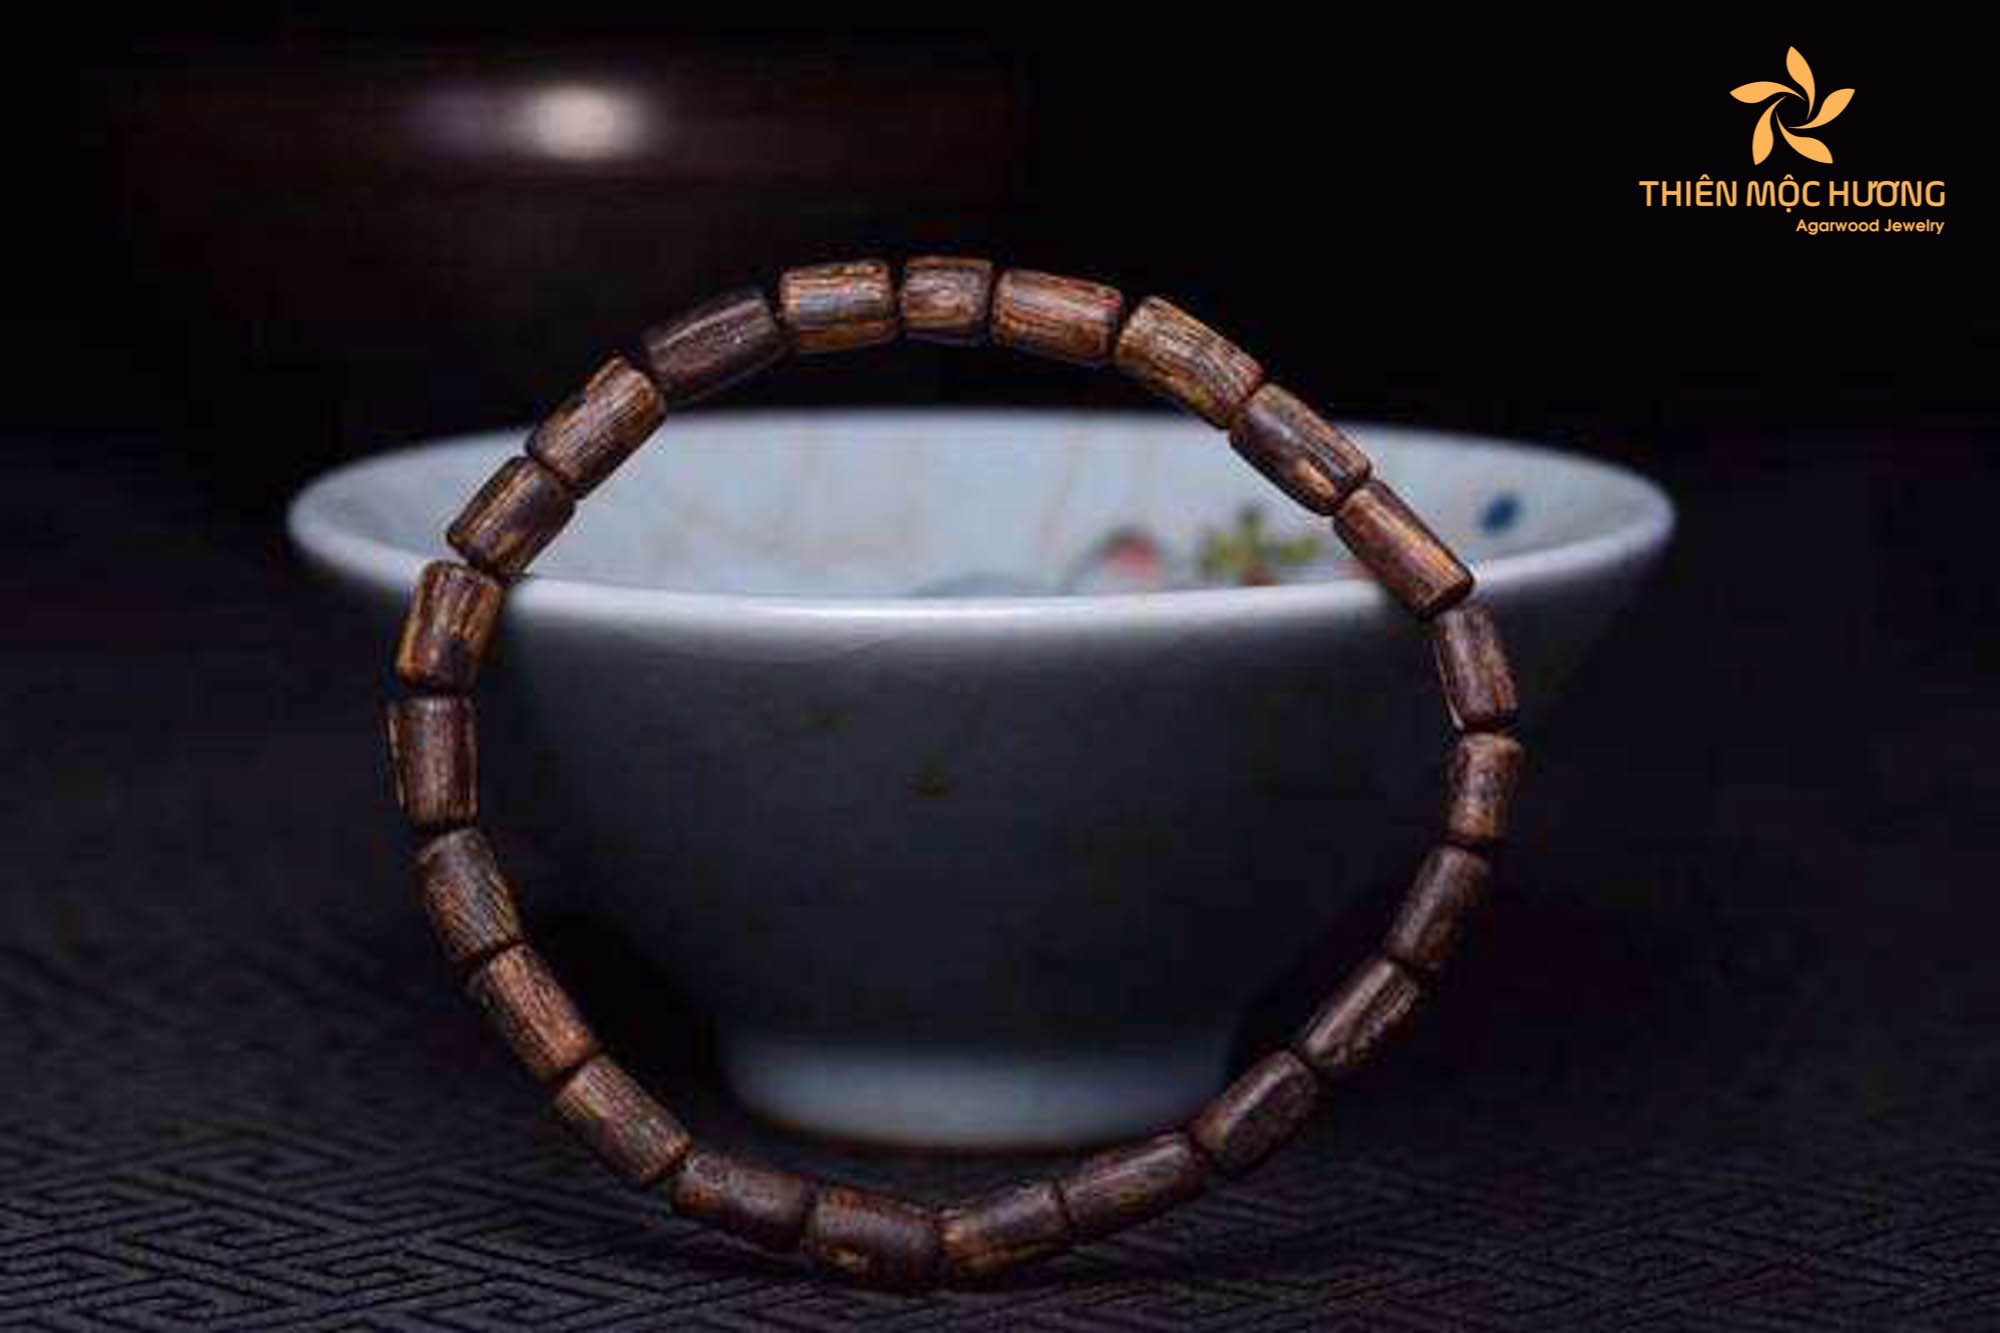 How to identify natural and artificial submerged sinking Agarwood bracelet? Observe the texture and appearance